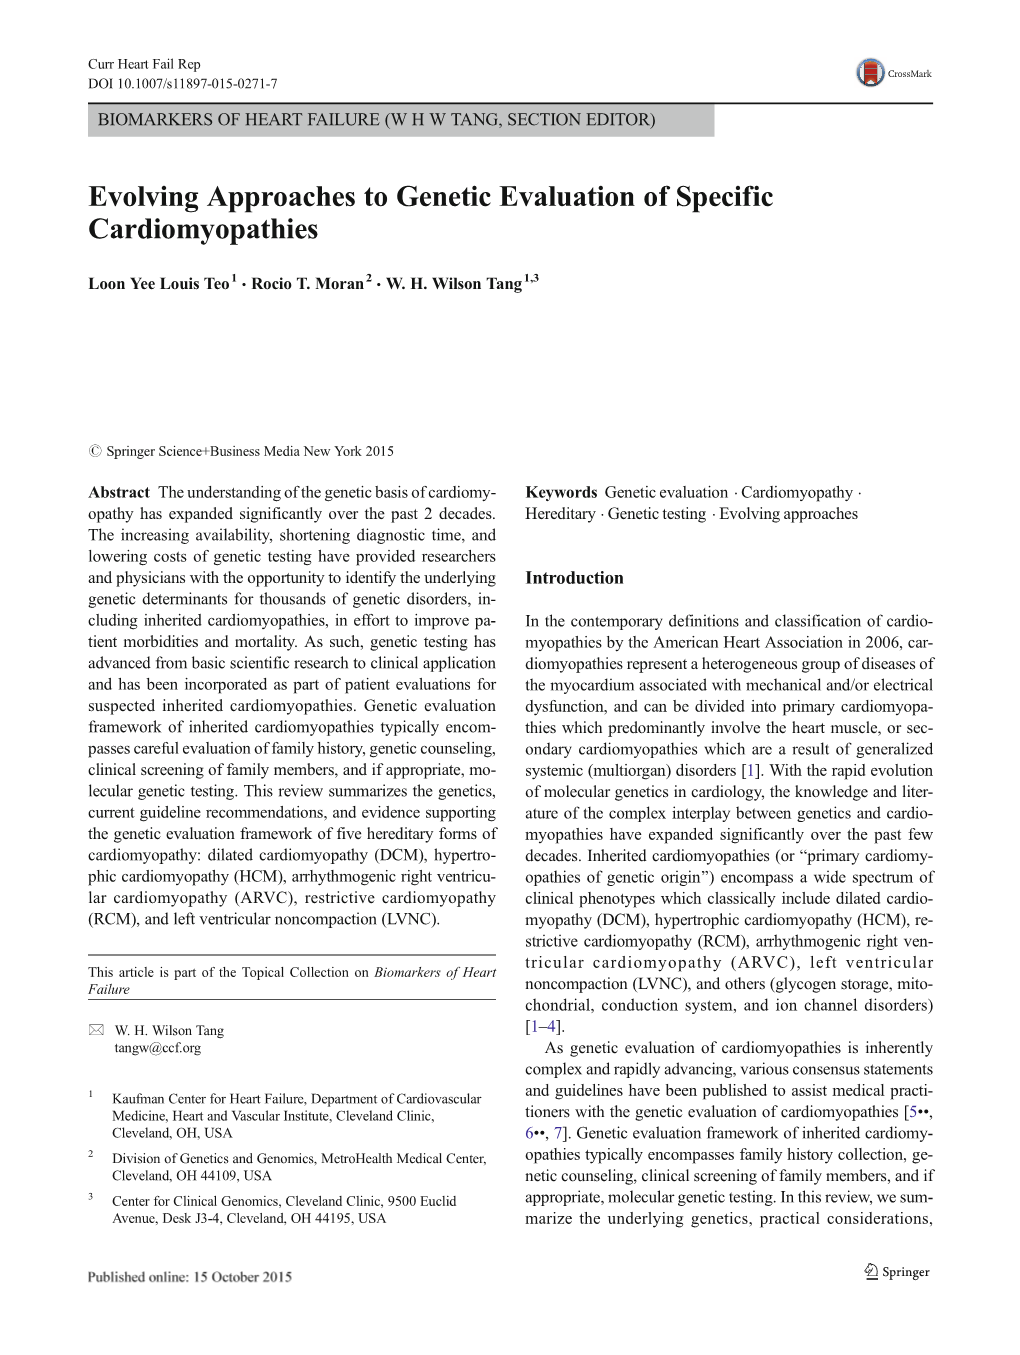 Evolving Approaches to Genetic Evaluation of Specific Cardiomyopathies